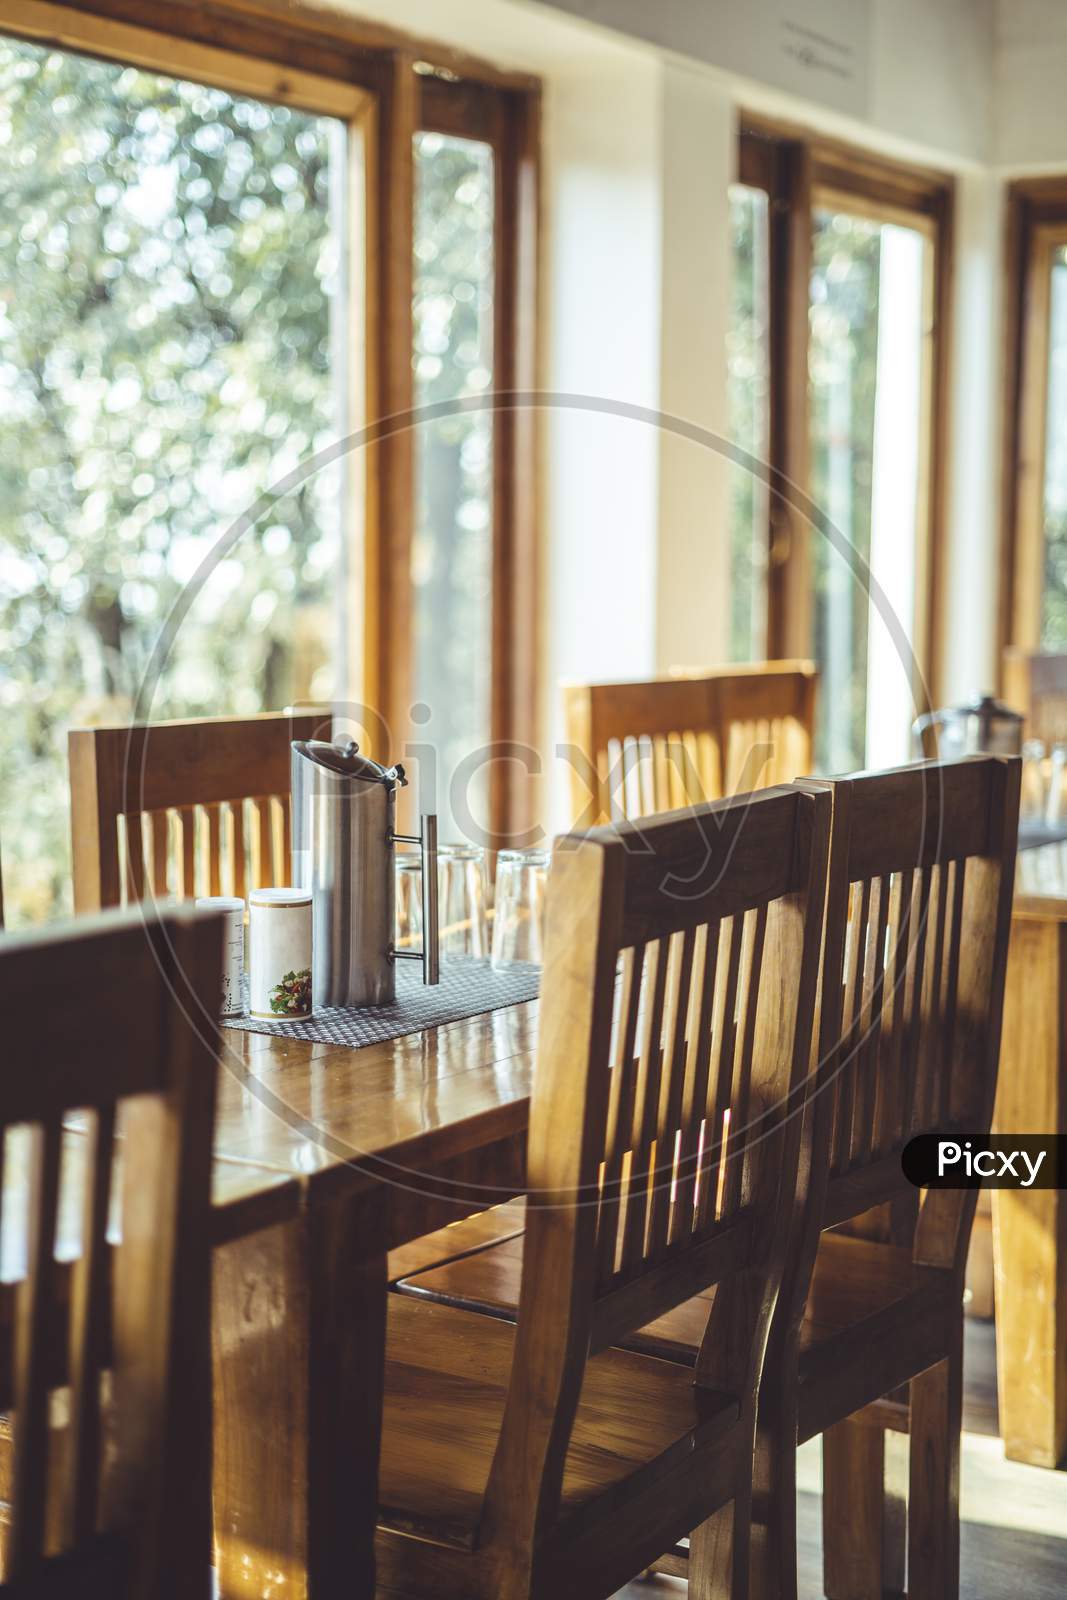 Shot Of A Dining Table With Focus On The Dining Chairs Captured In Interior Of A Restaurant.